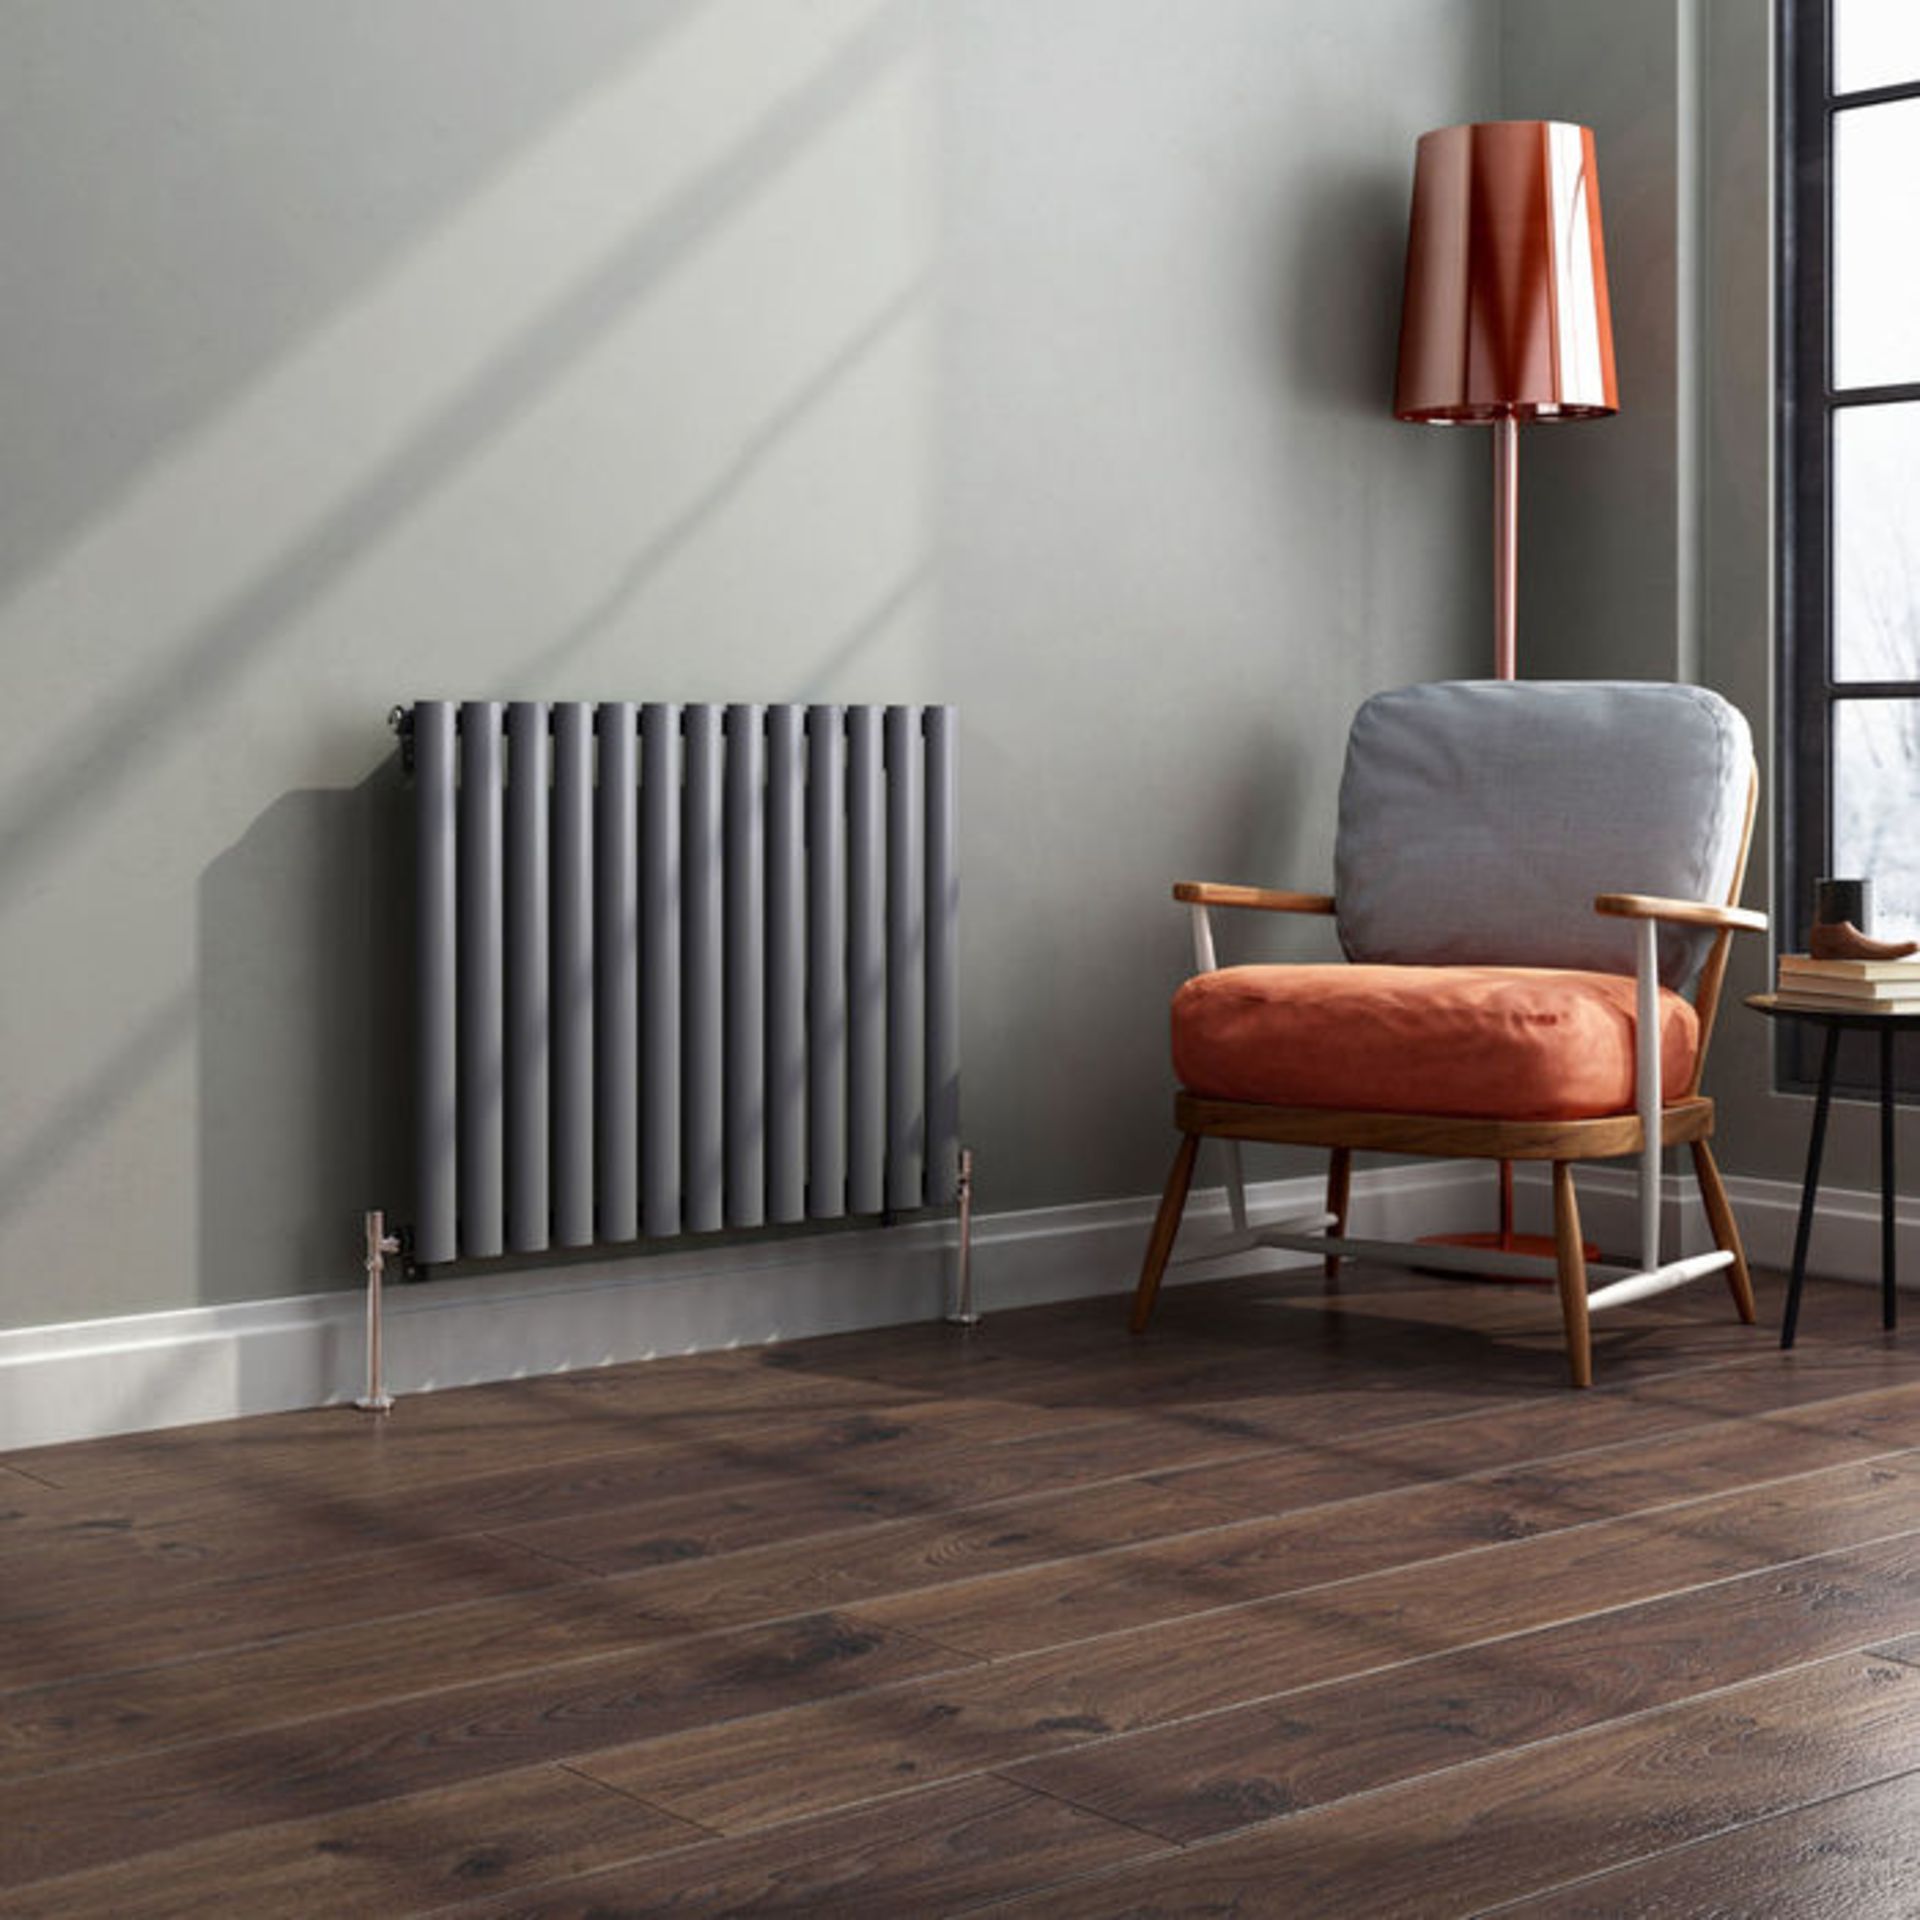 (G6) 600x780mm Anthracite Single Panel Oval Tube Horizontal Radiator RRP £167.99 Low carbon steel, - Image 2 of 5